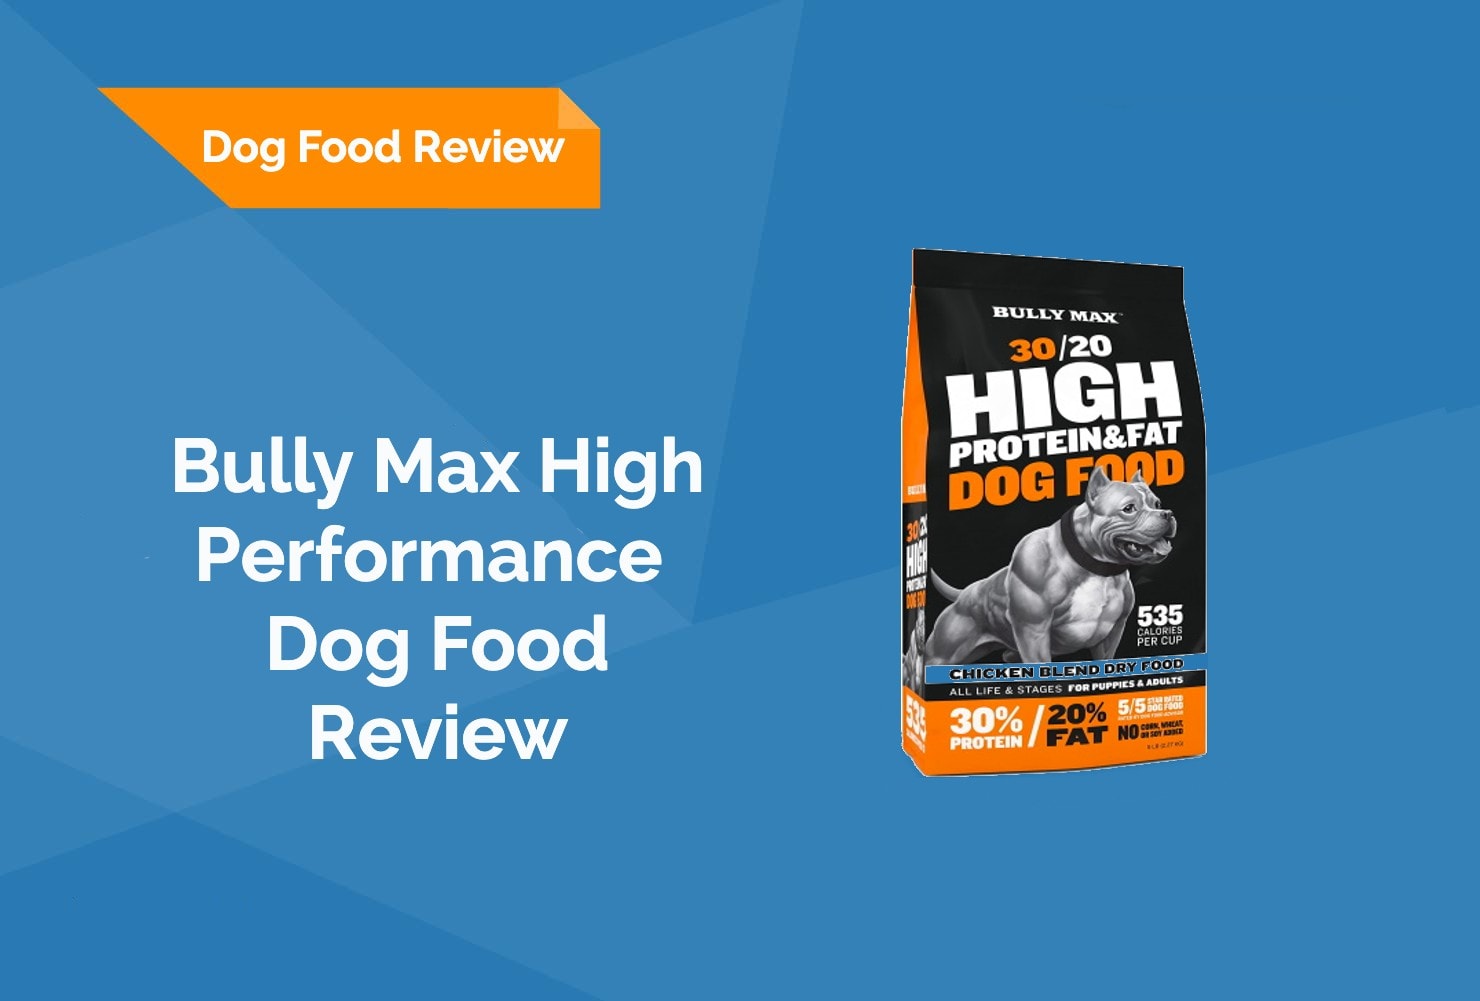 Bully Max High Performance Dog Food Reiew featured image